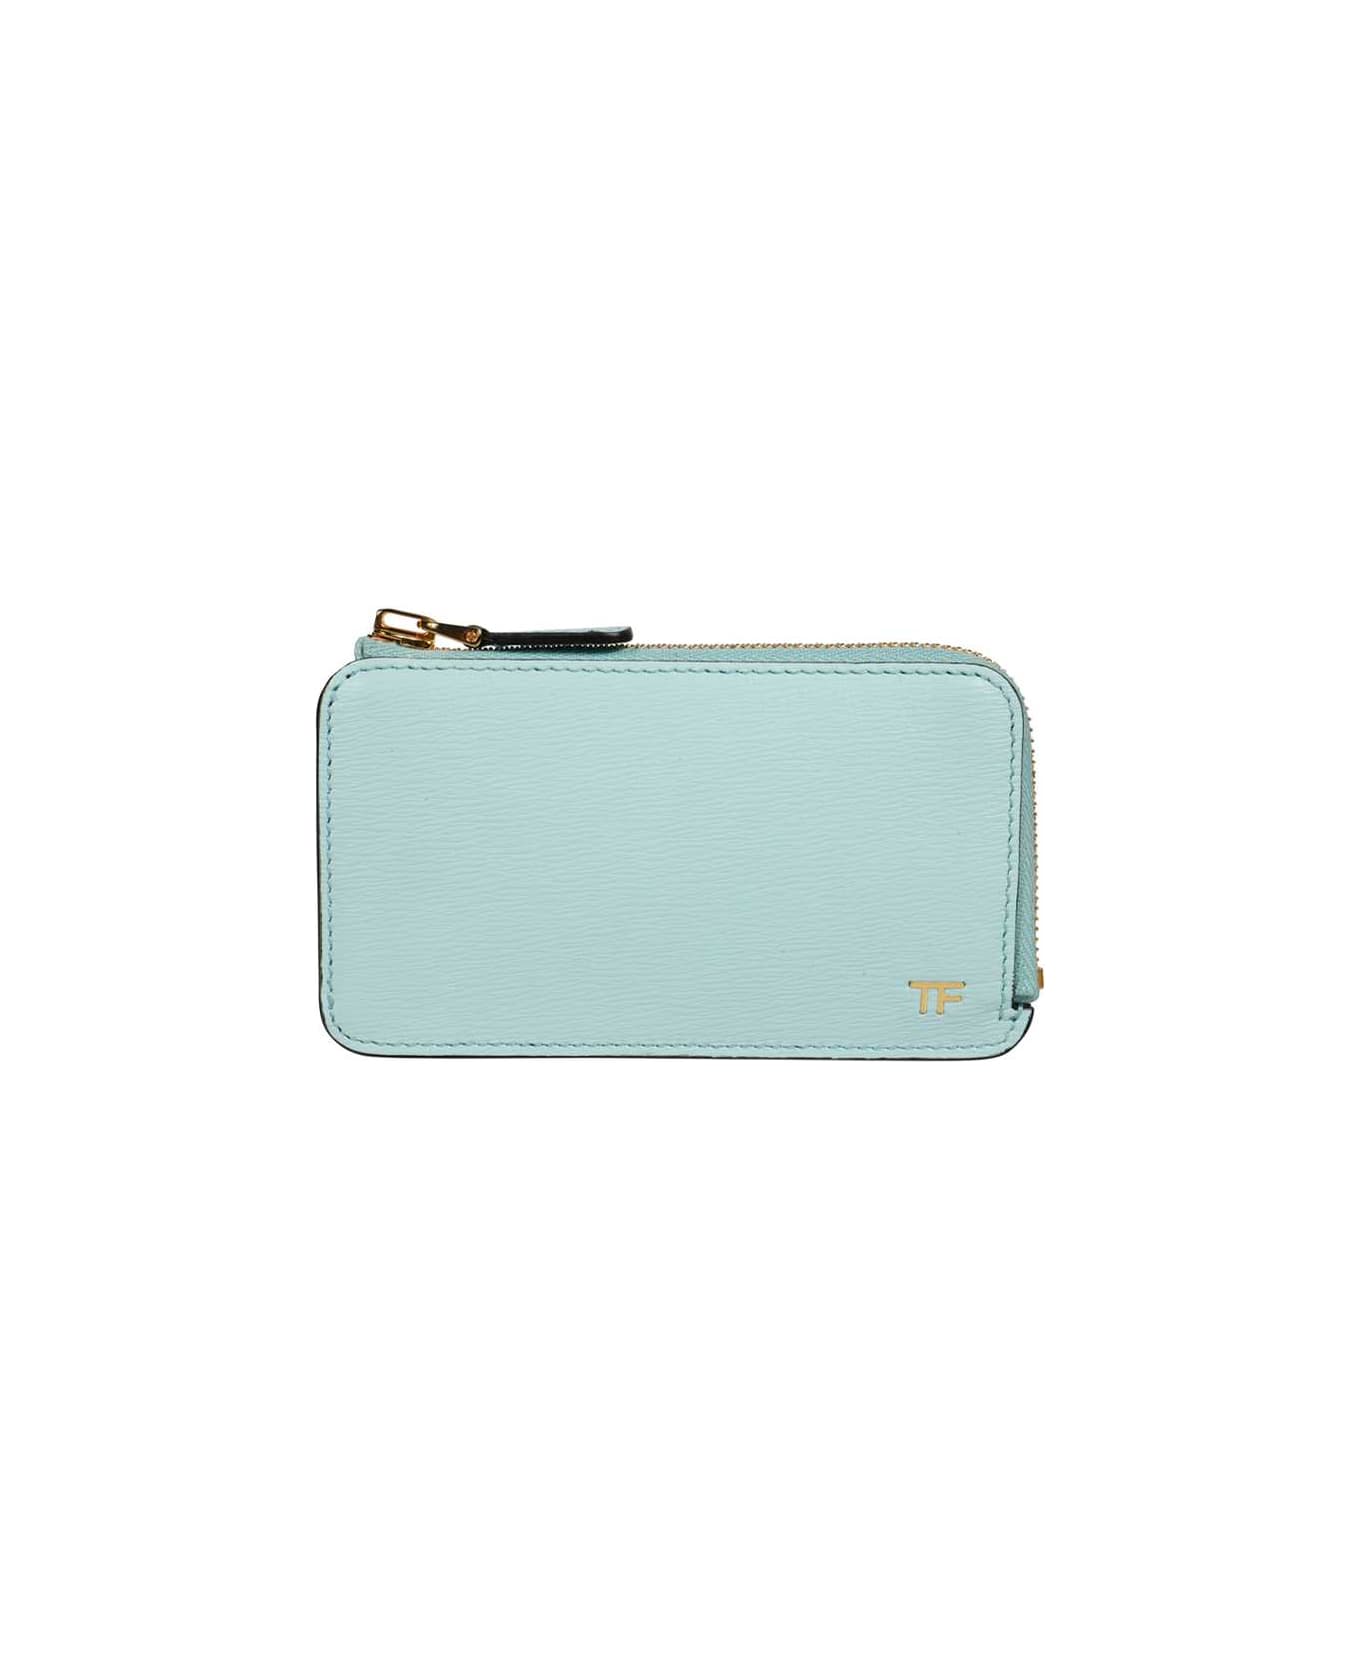 Tom Ford Printed Leather Wallet - Light Blue